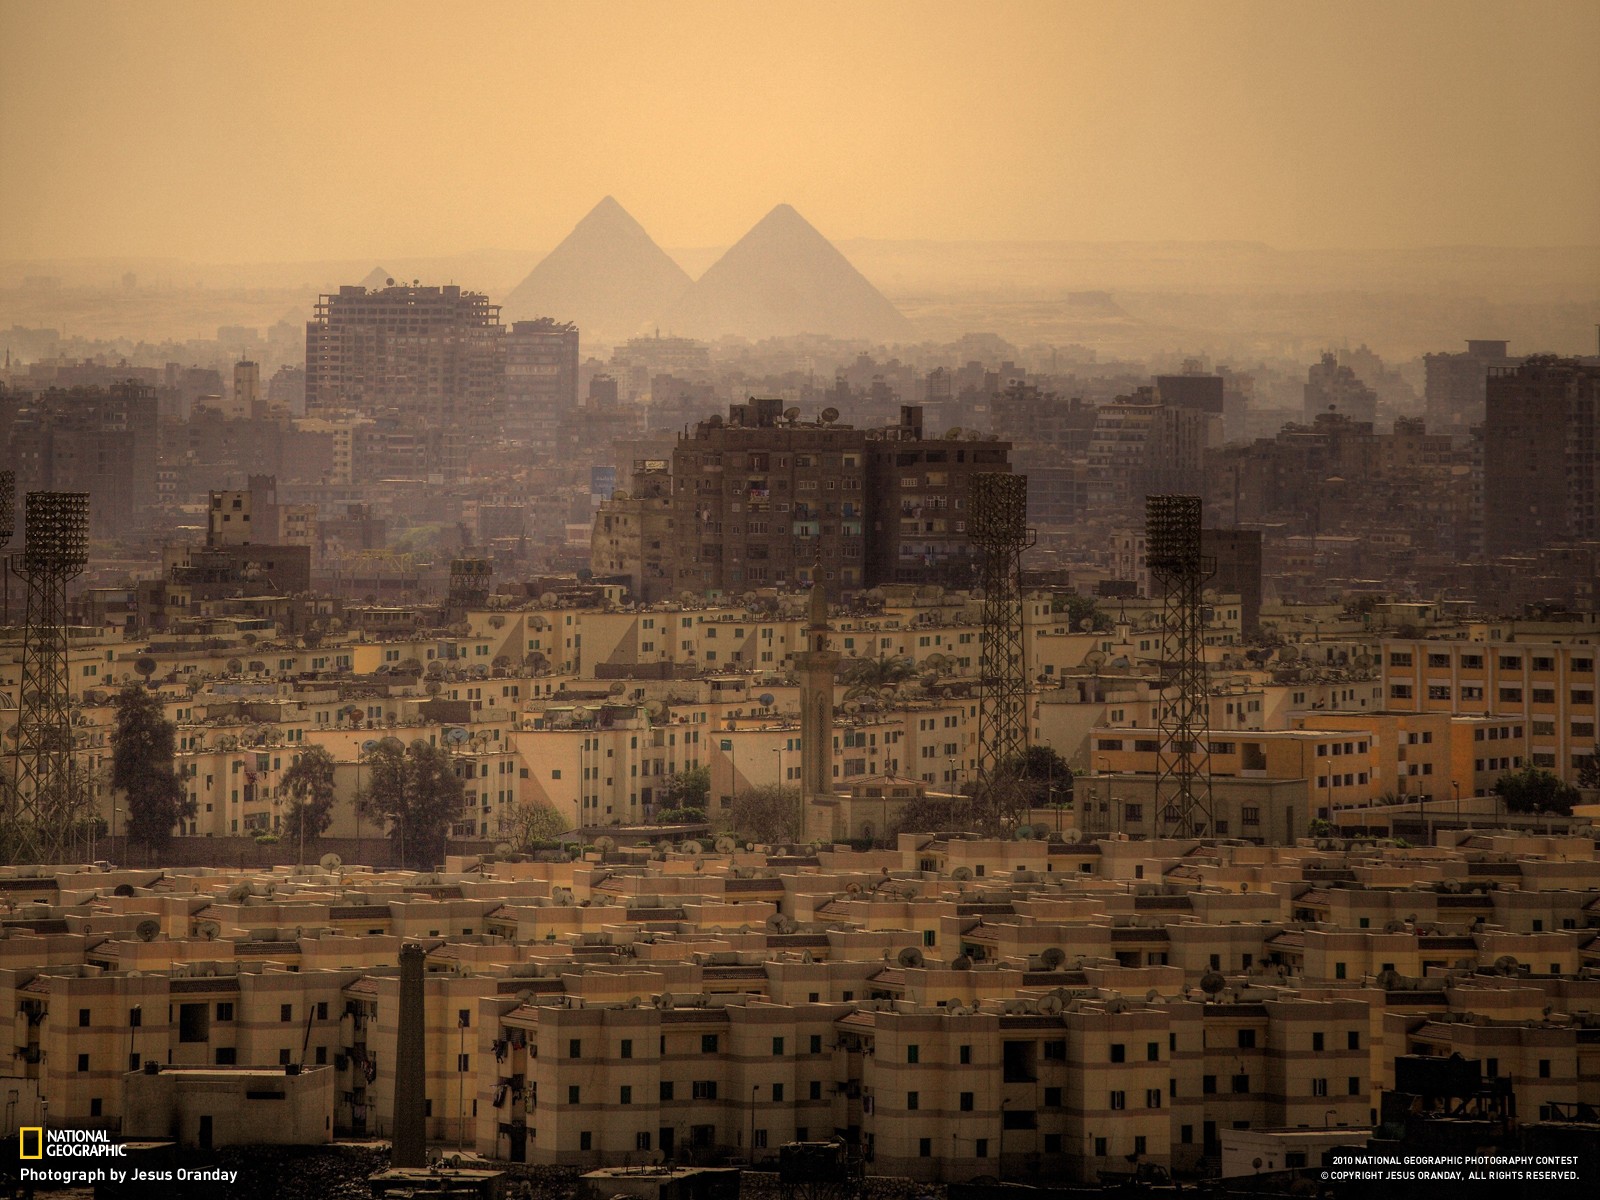 General 1600x1200 pyramid city National Geographic Egypt cityscape watermarked 2010 (Year)